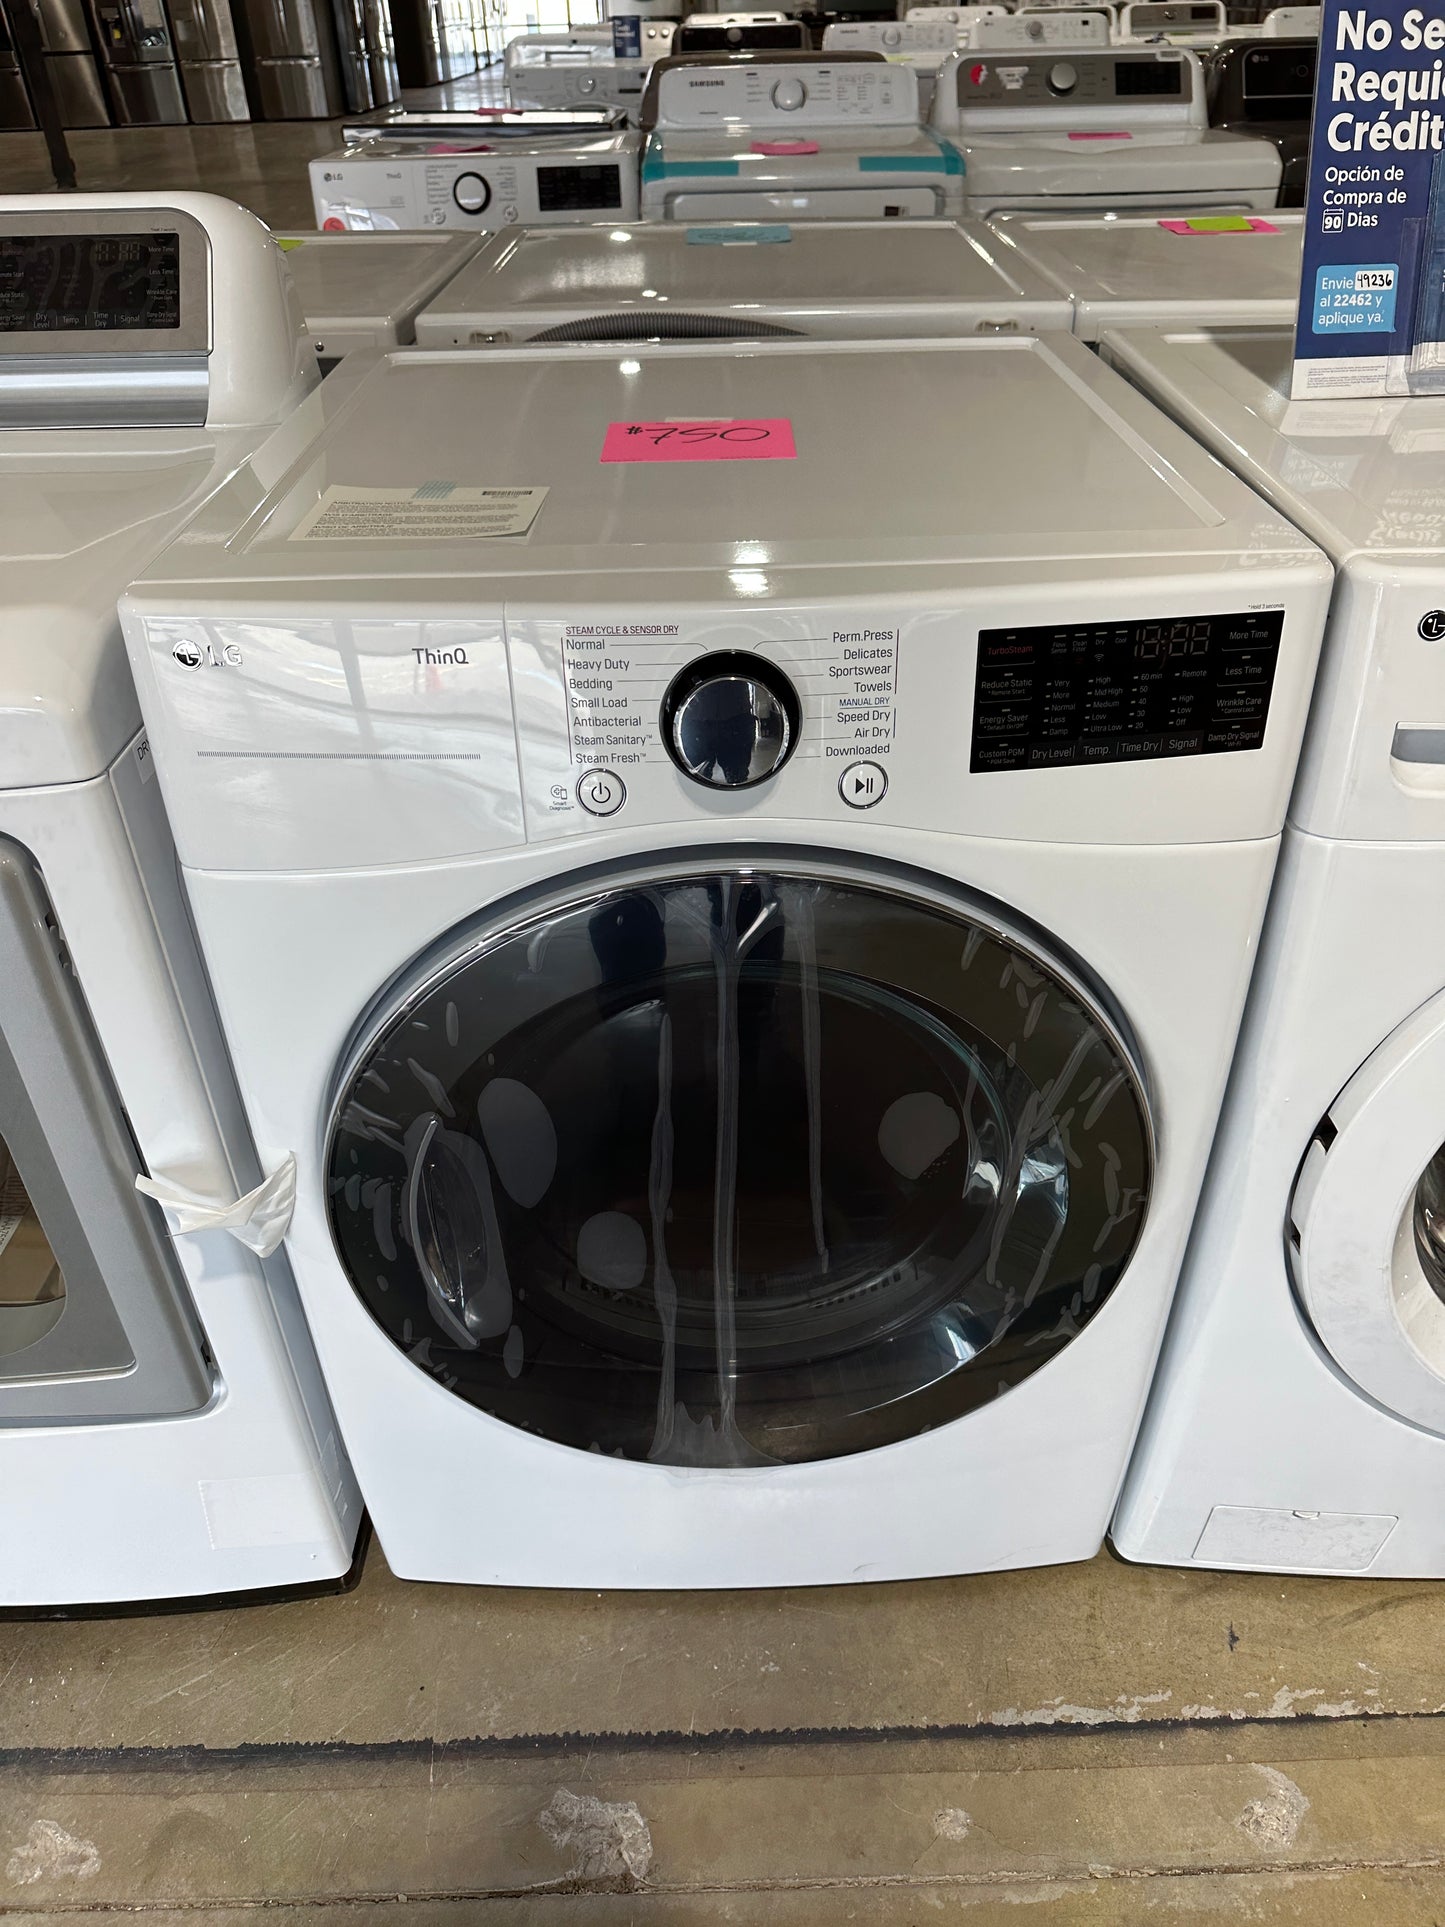 GREAT NEW STACKABLE DRYER - DRY11694S DLEX3900W